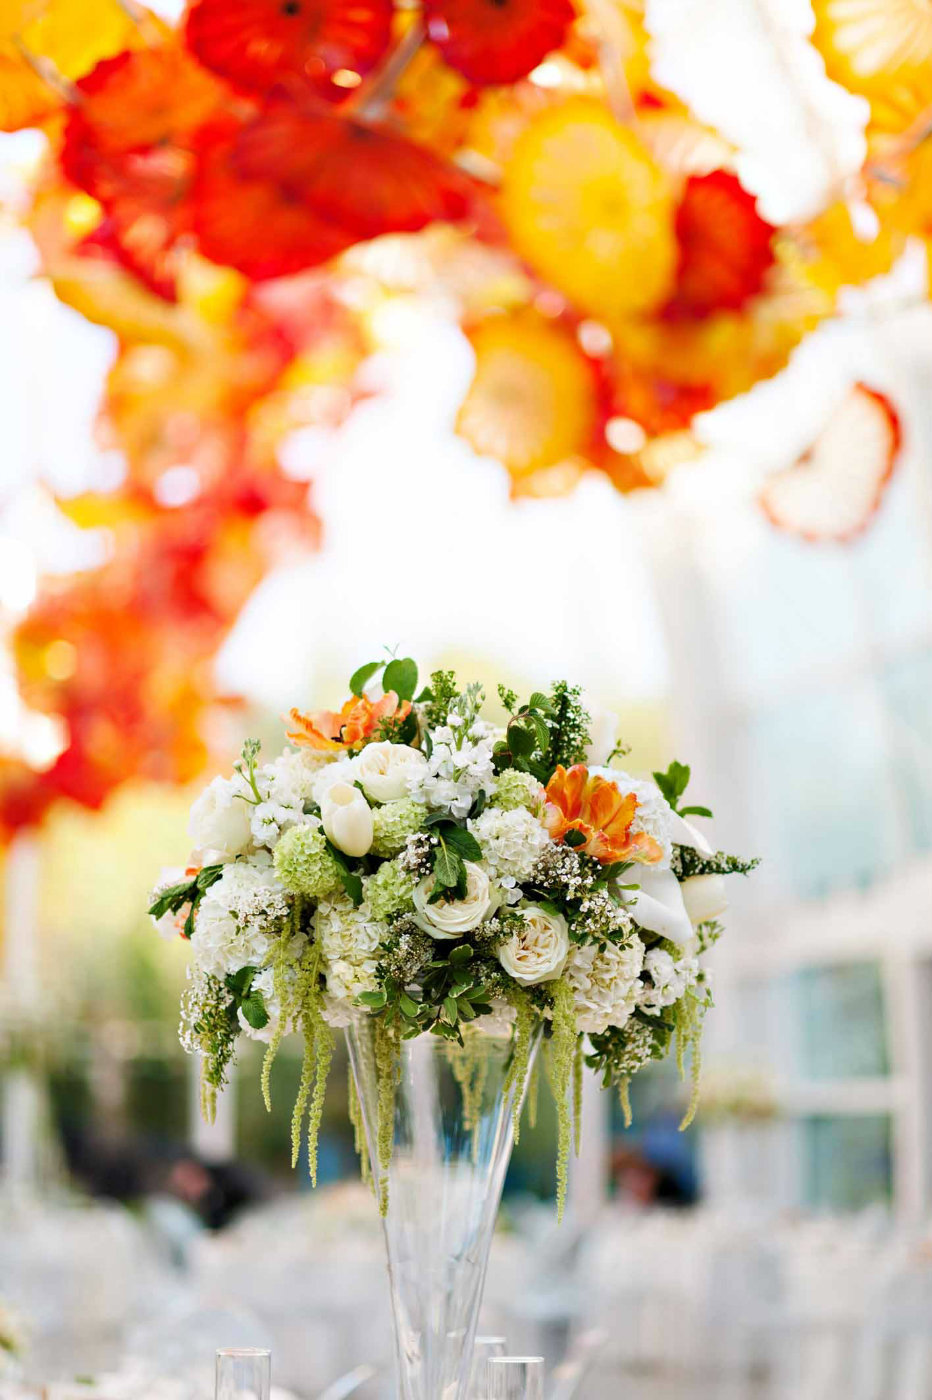 Stunning spring wedding at Chihuly gardens and glass in Seattle.